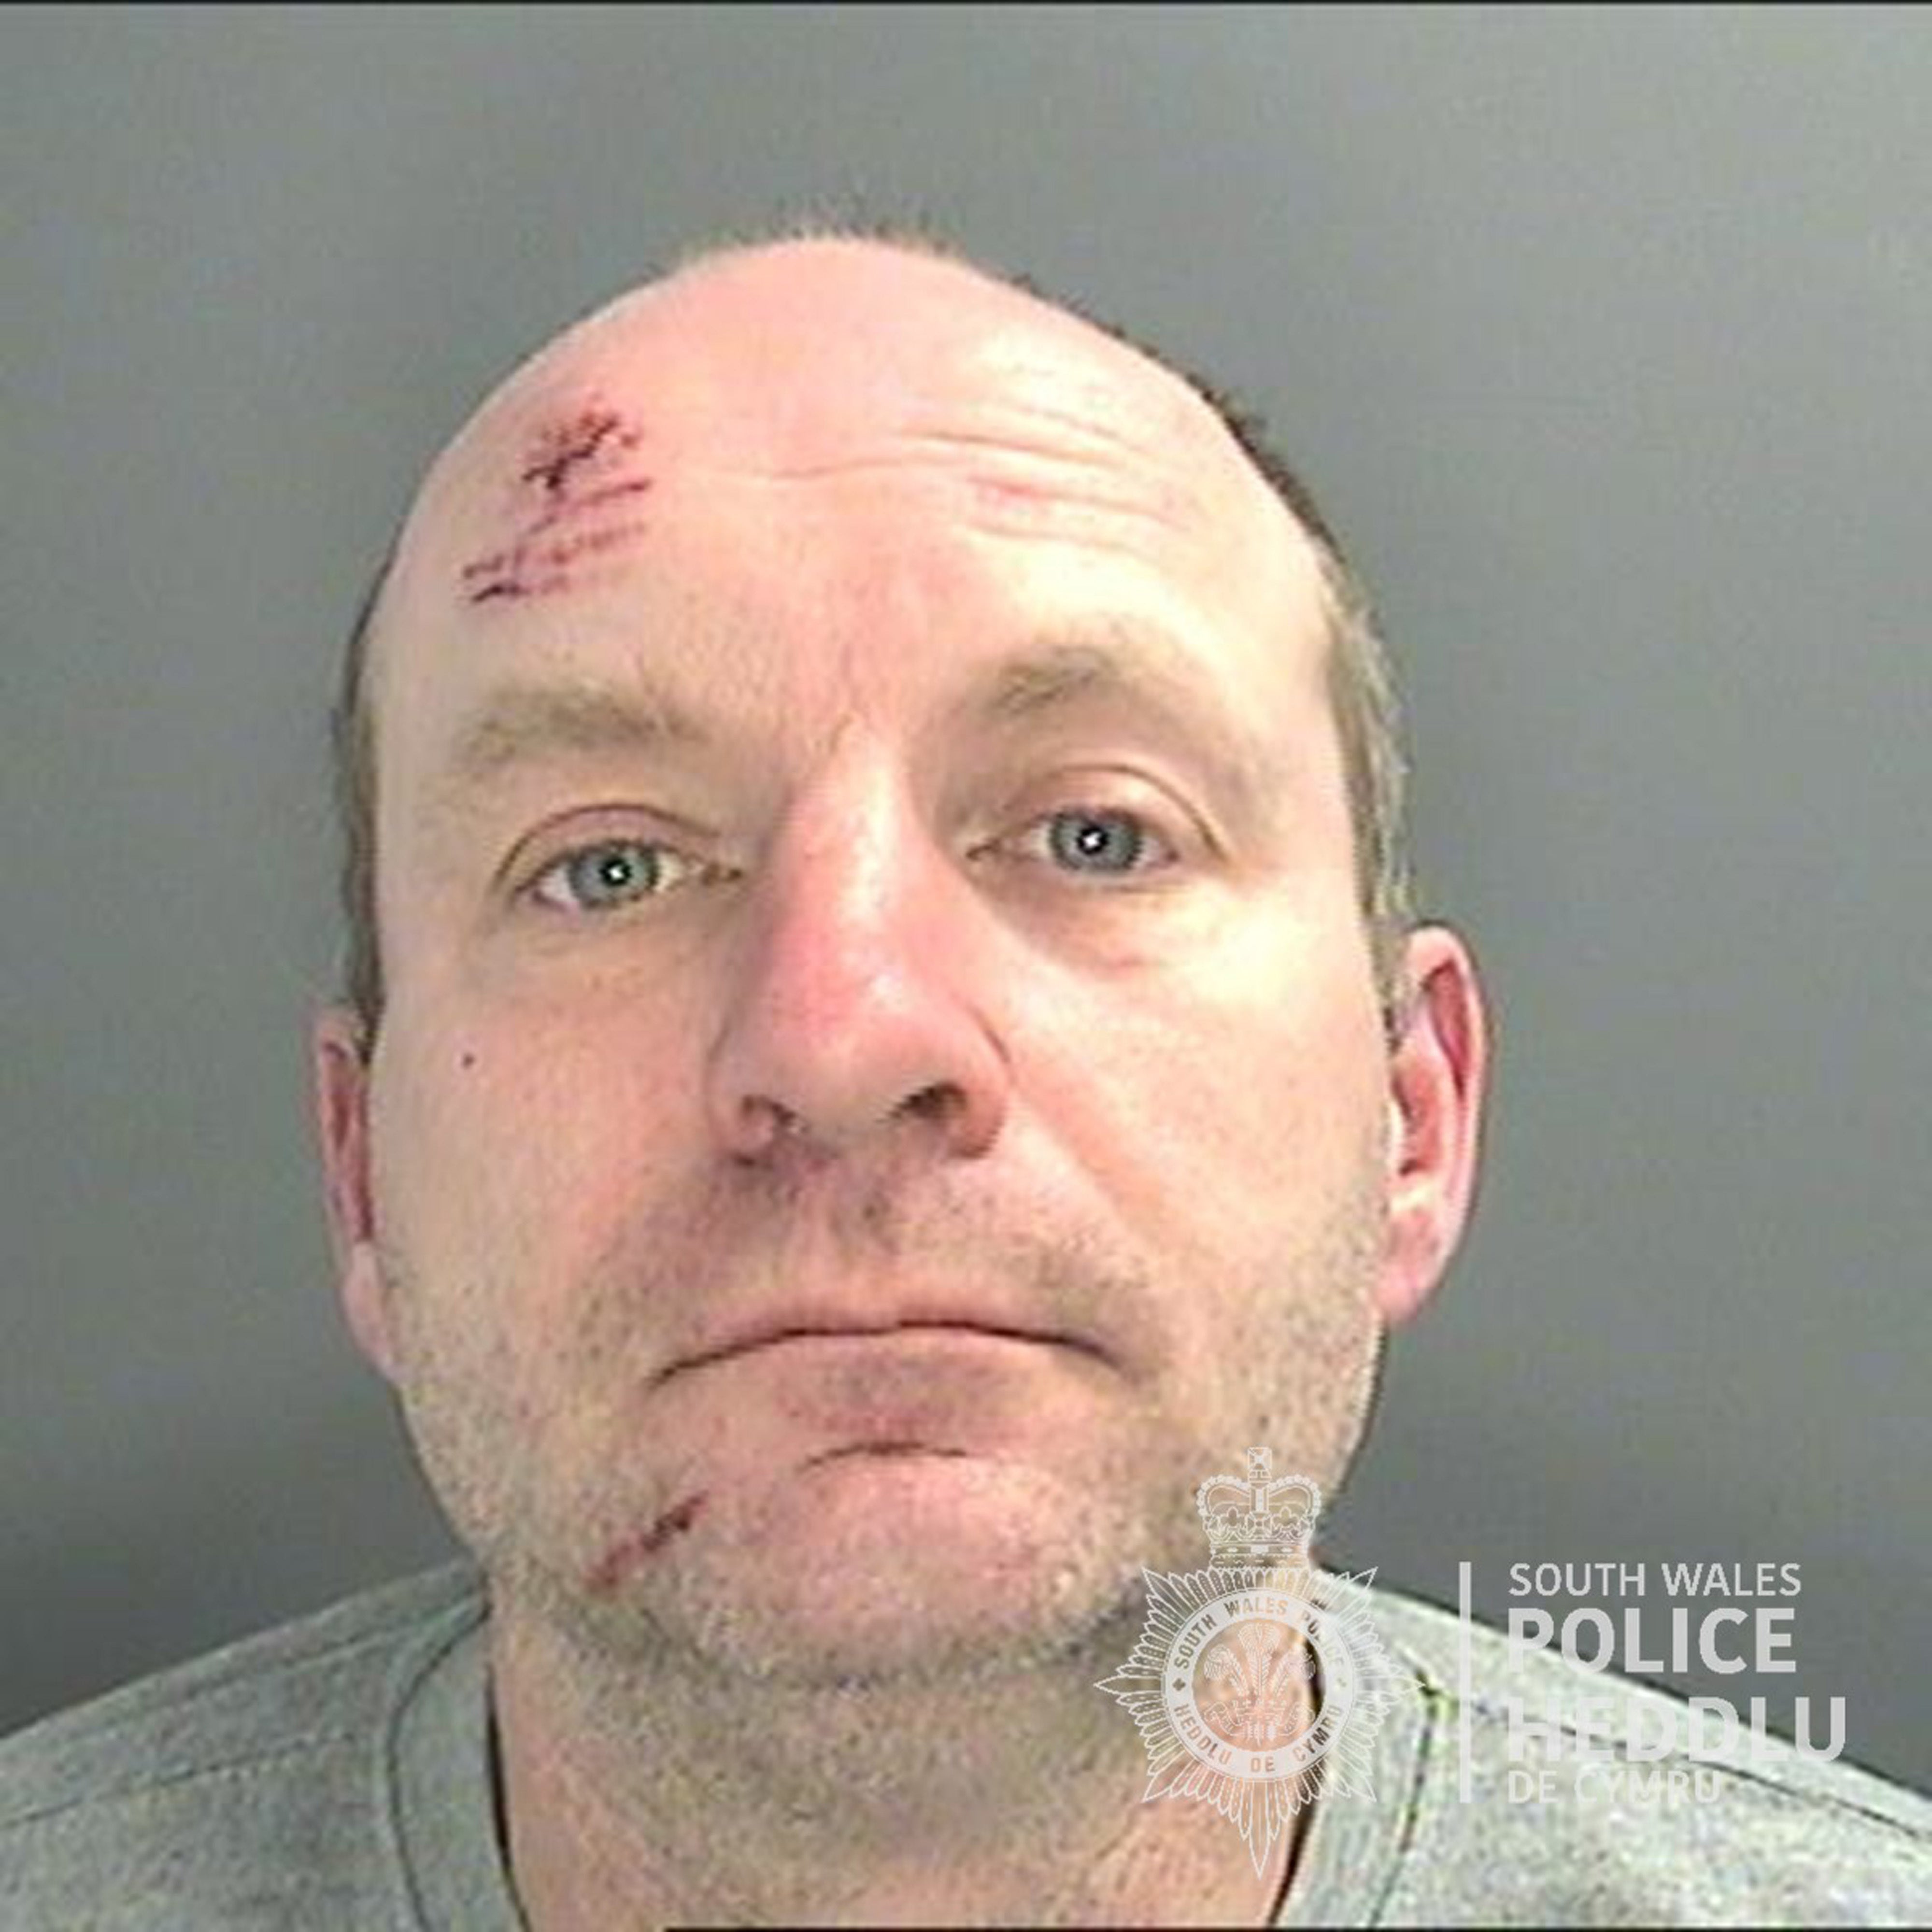 Stephen Gibbs stabbed his partner seven times in the face when she tried to end their relationship (handout/PA)